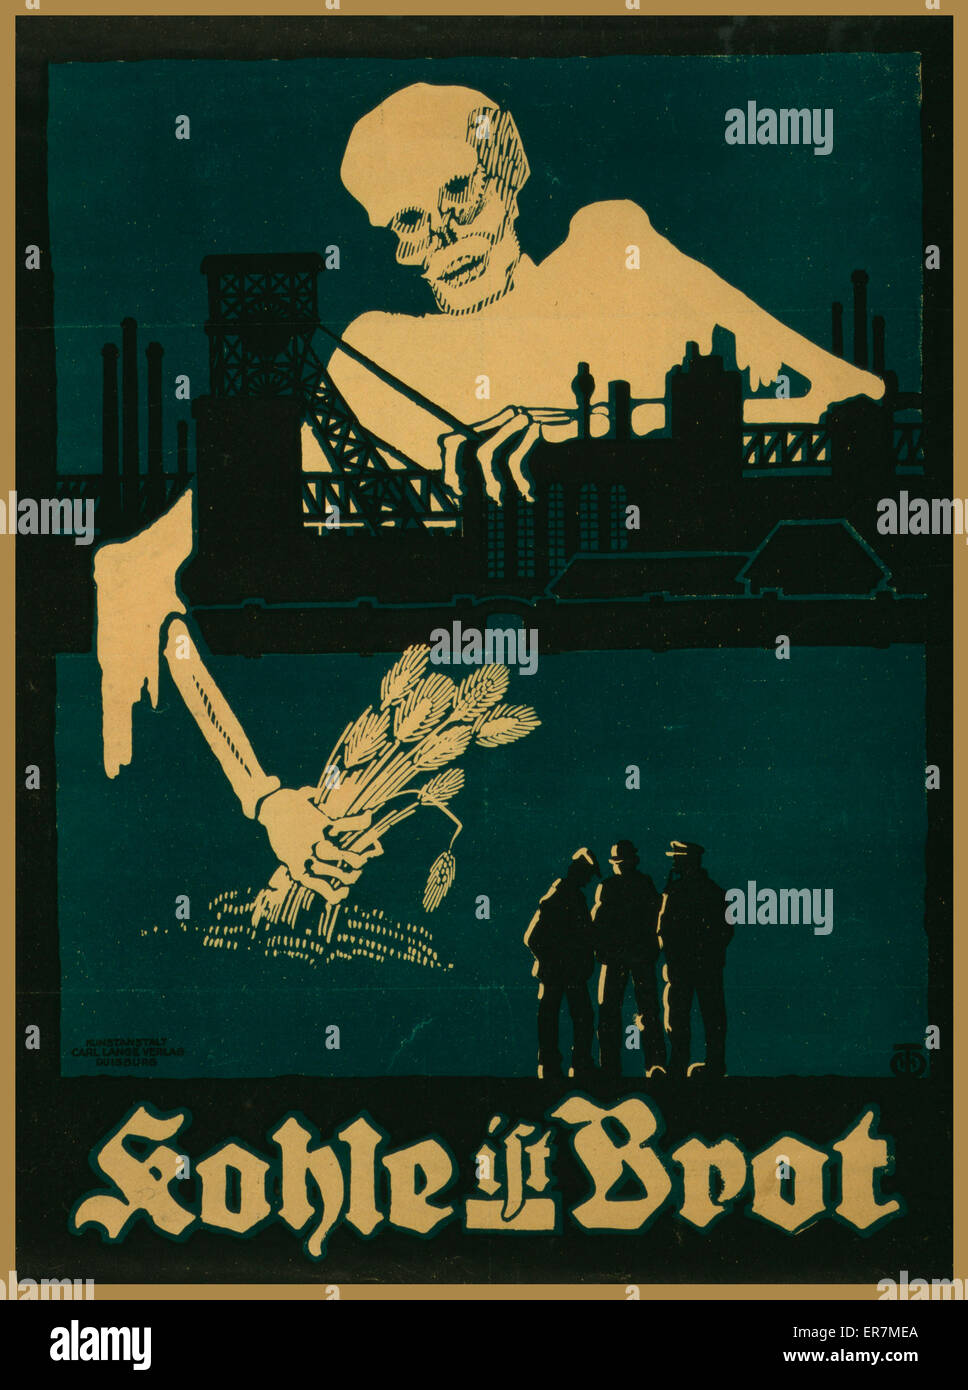 Kohle ist Brot. Poster shows a skeleton holding a sheaf of wheat looming over buildings at a port; three men are in lower right corner. Text: Coal is bread. Date between 1918 and 1920. Stock Photo